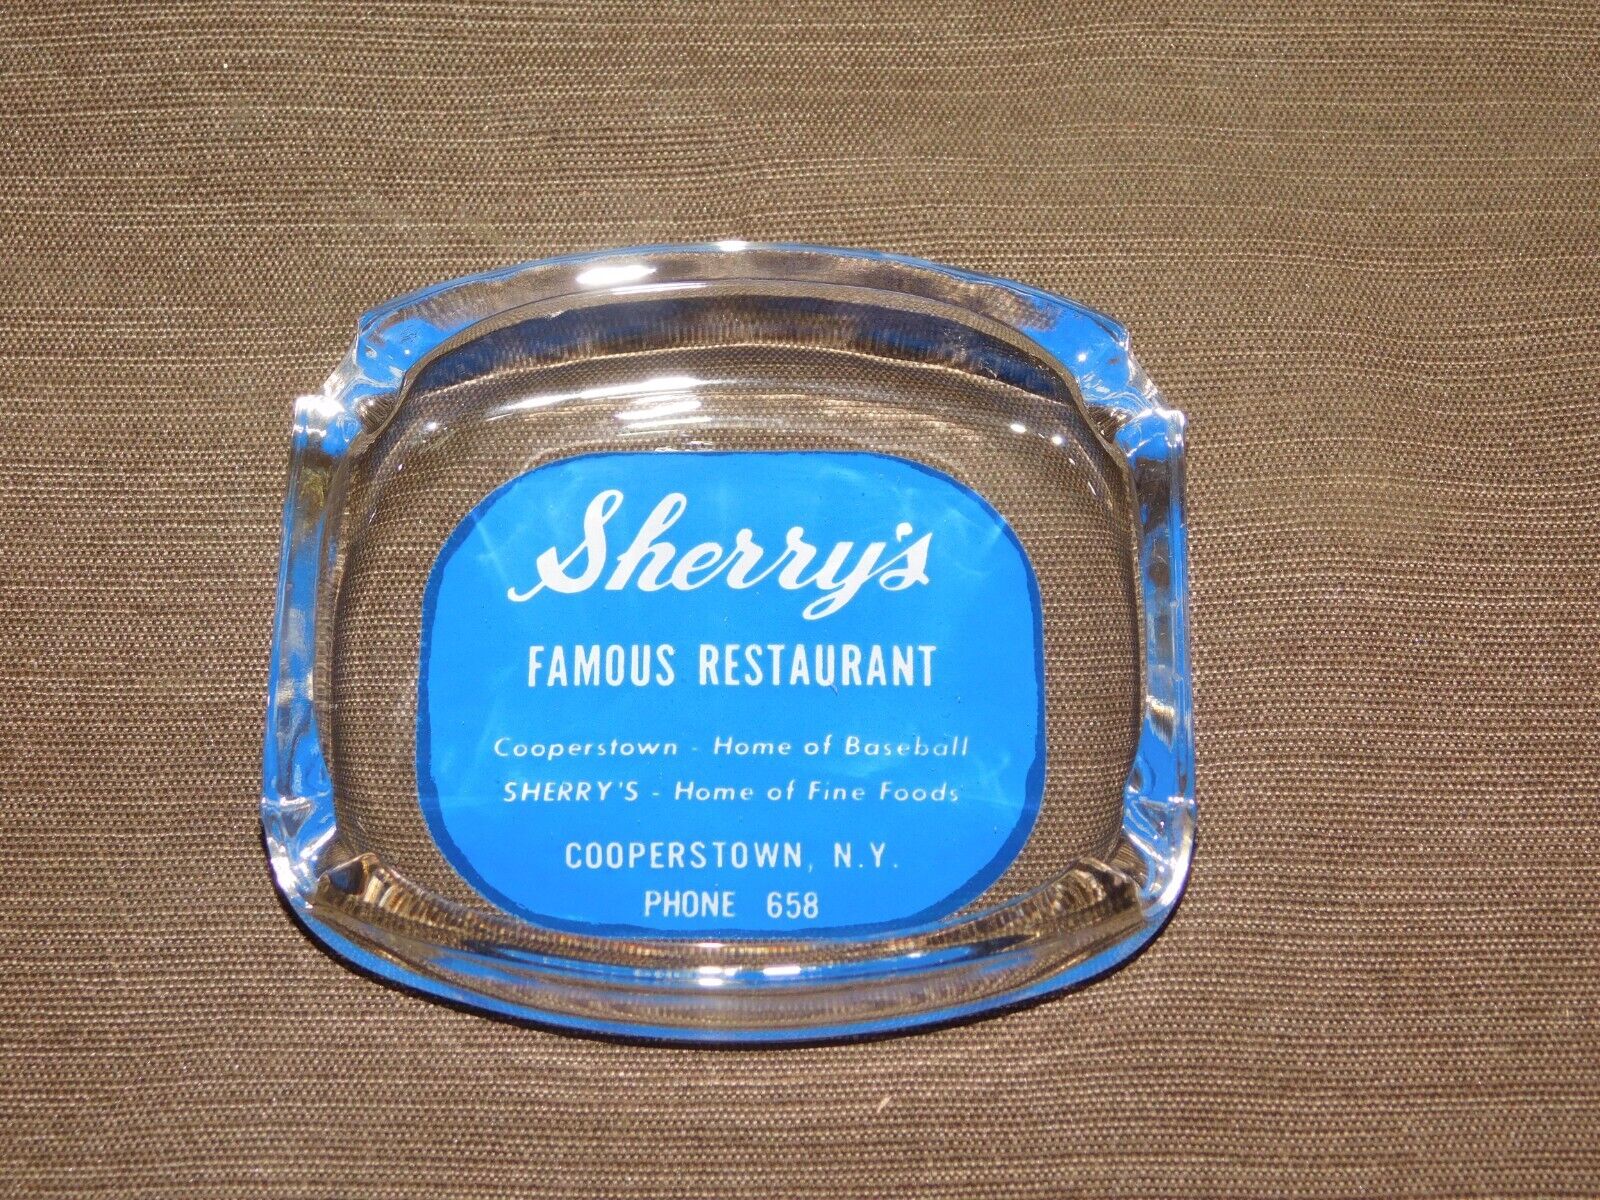 VINTAGE TOBACCO BASEBALL SHERRY\'S FAMOUS RESTAURANT COOPERSTOWN NY GLASS ASHTRAY